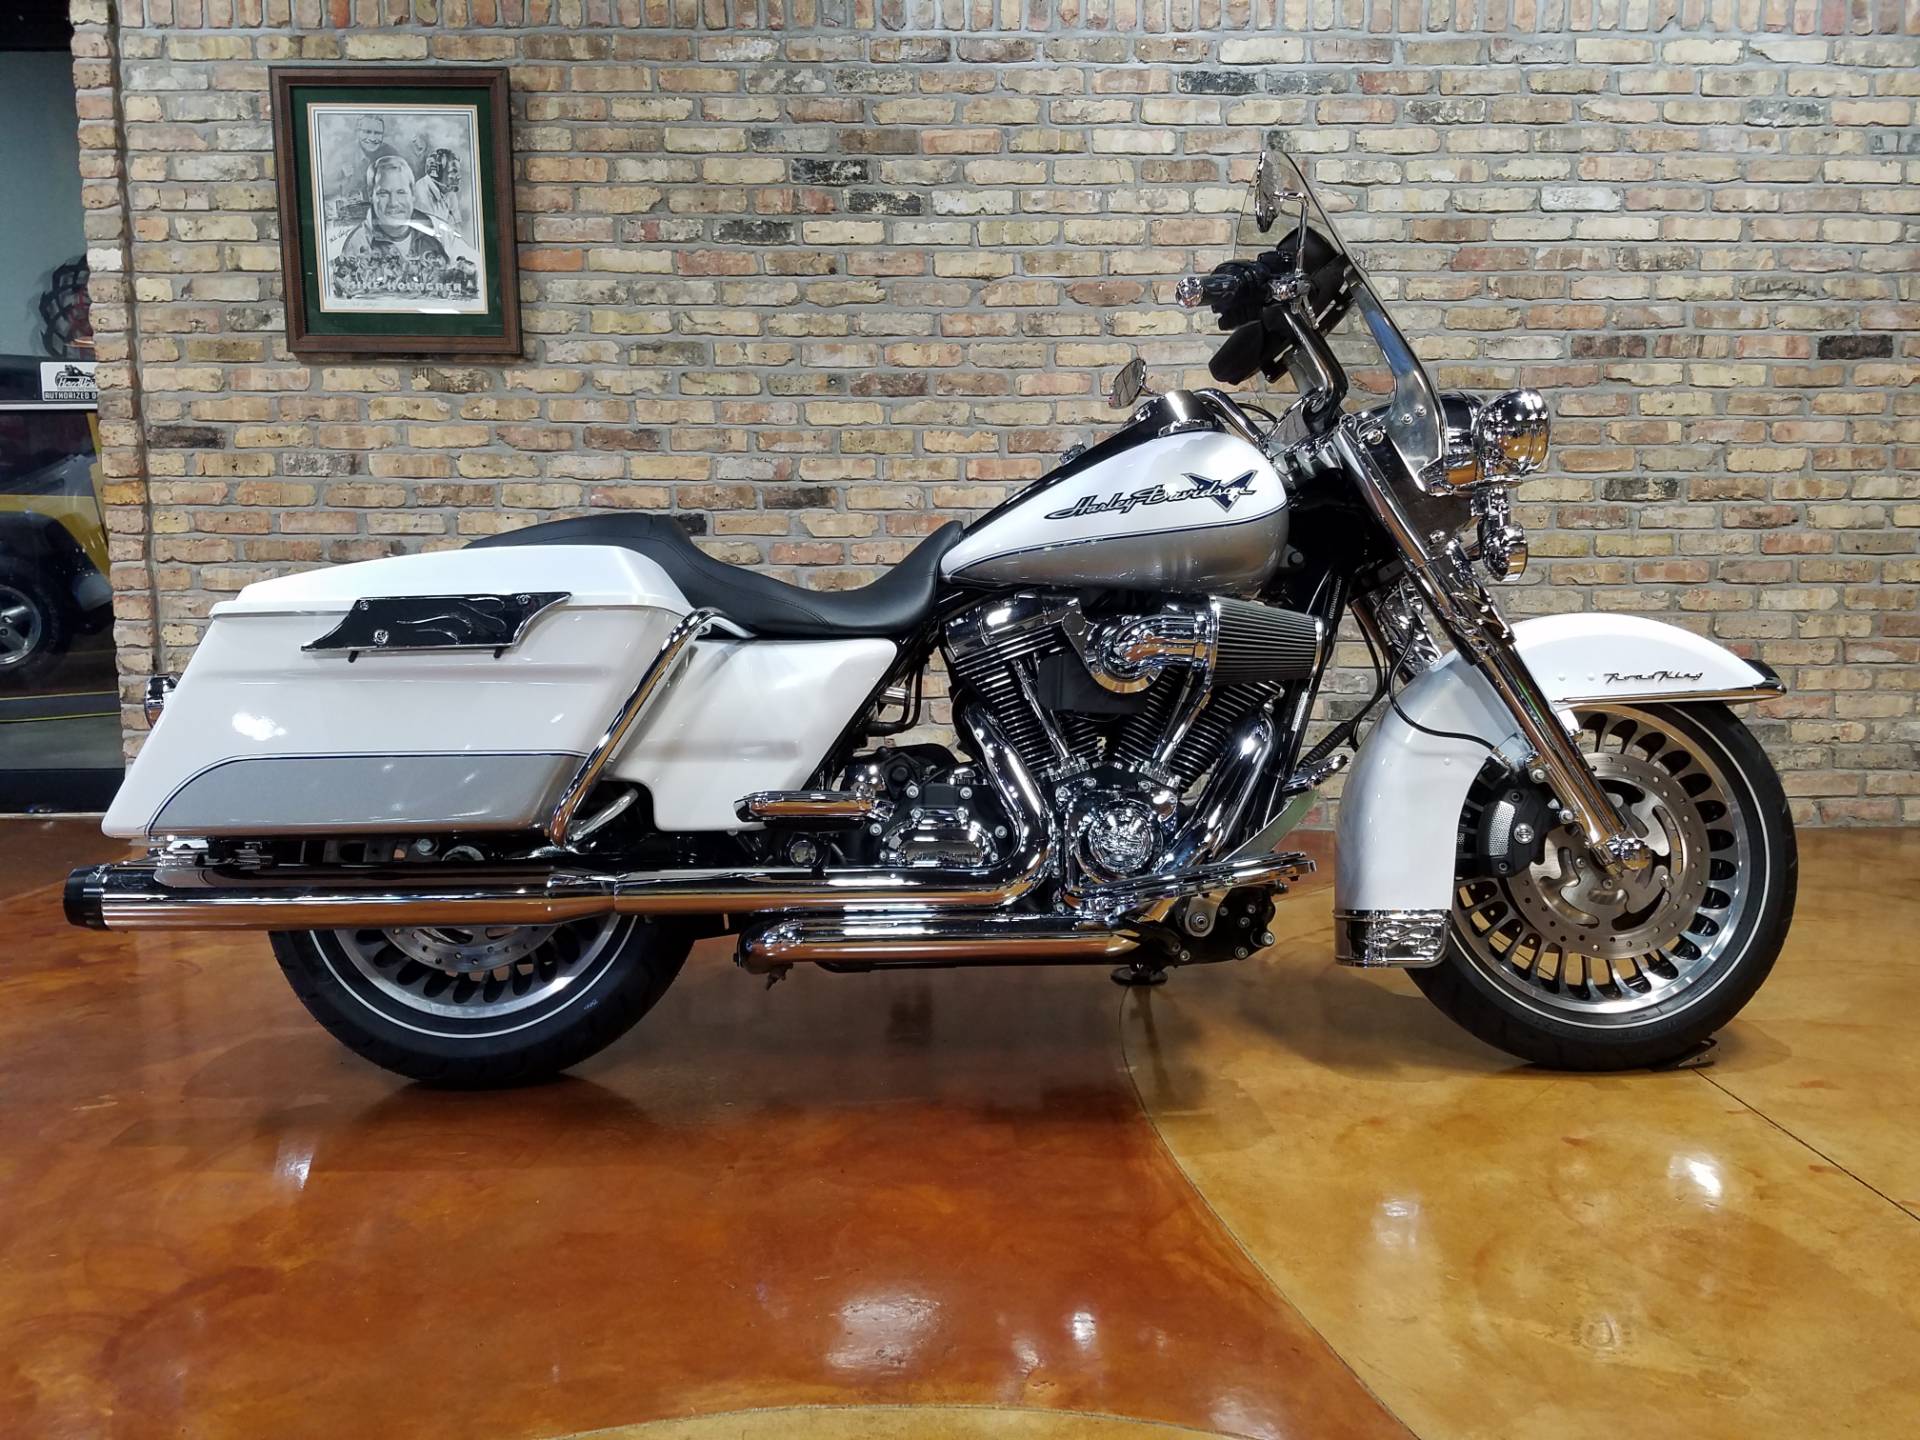 Used 2009 Harley Davidson Road King Motorcycles In Big Bend Wi 4317 White Gold Pearl Pewter Pearl